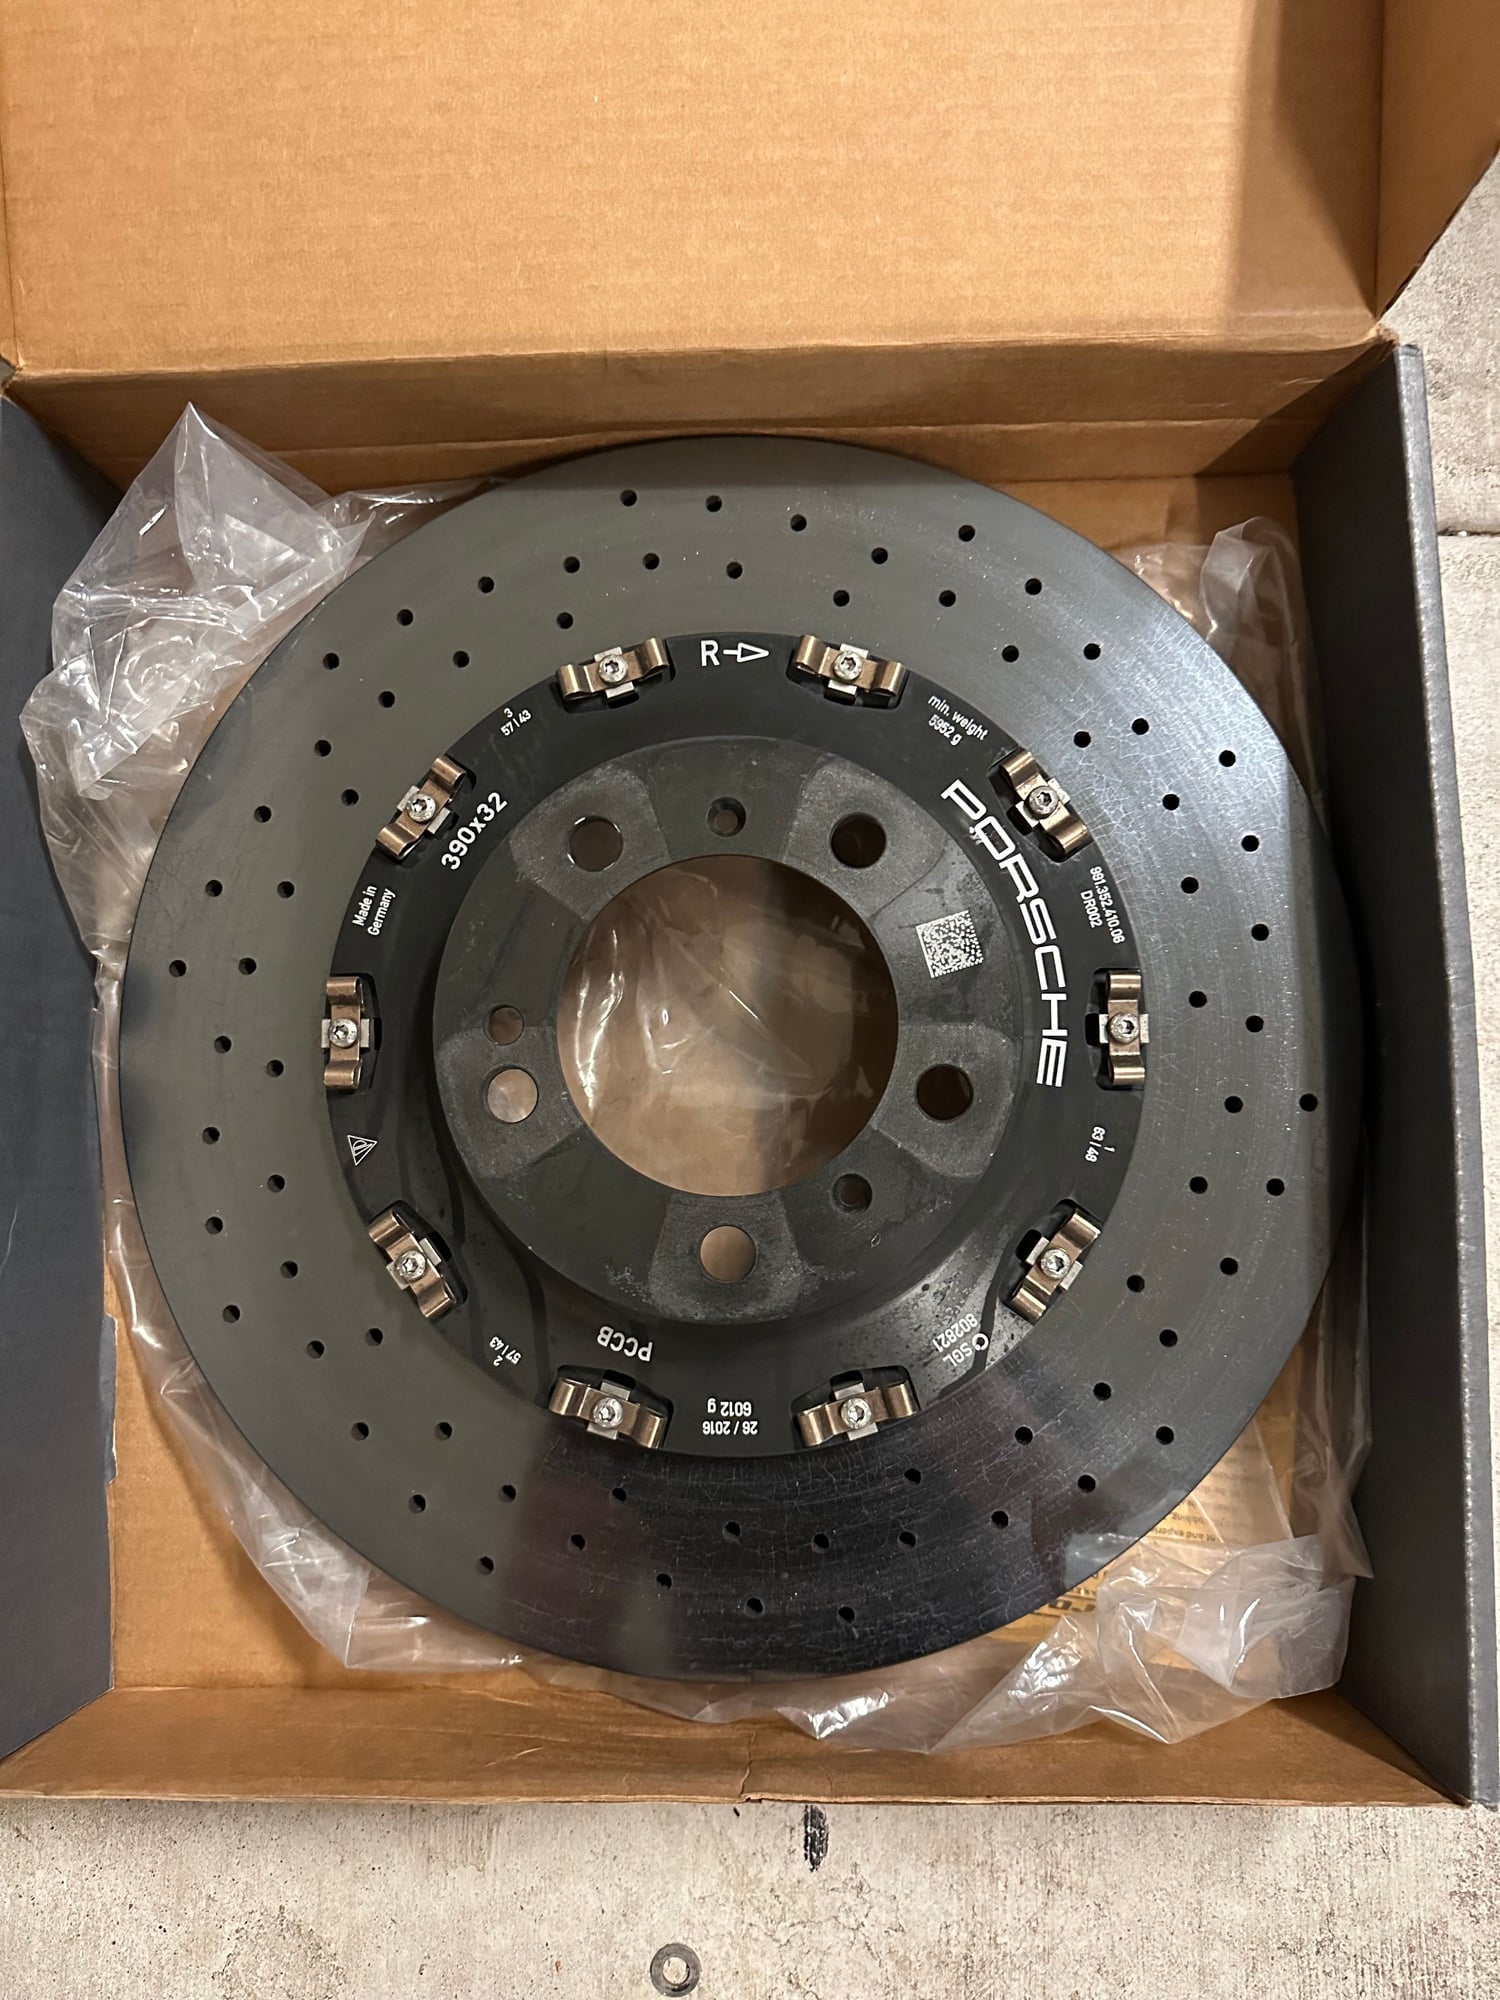 Brakes - 2016 GT4 PCCB Rotors and Pads (410mmx36 and 390x32) - Used - 2016 Porsche Cayman GT4 - Austin, TX 78641, United States